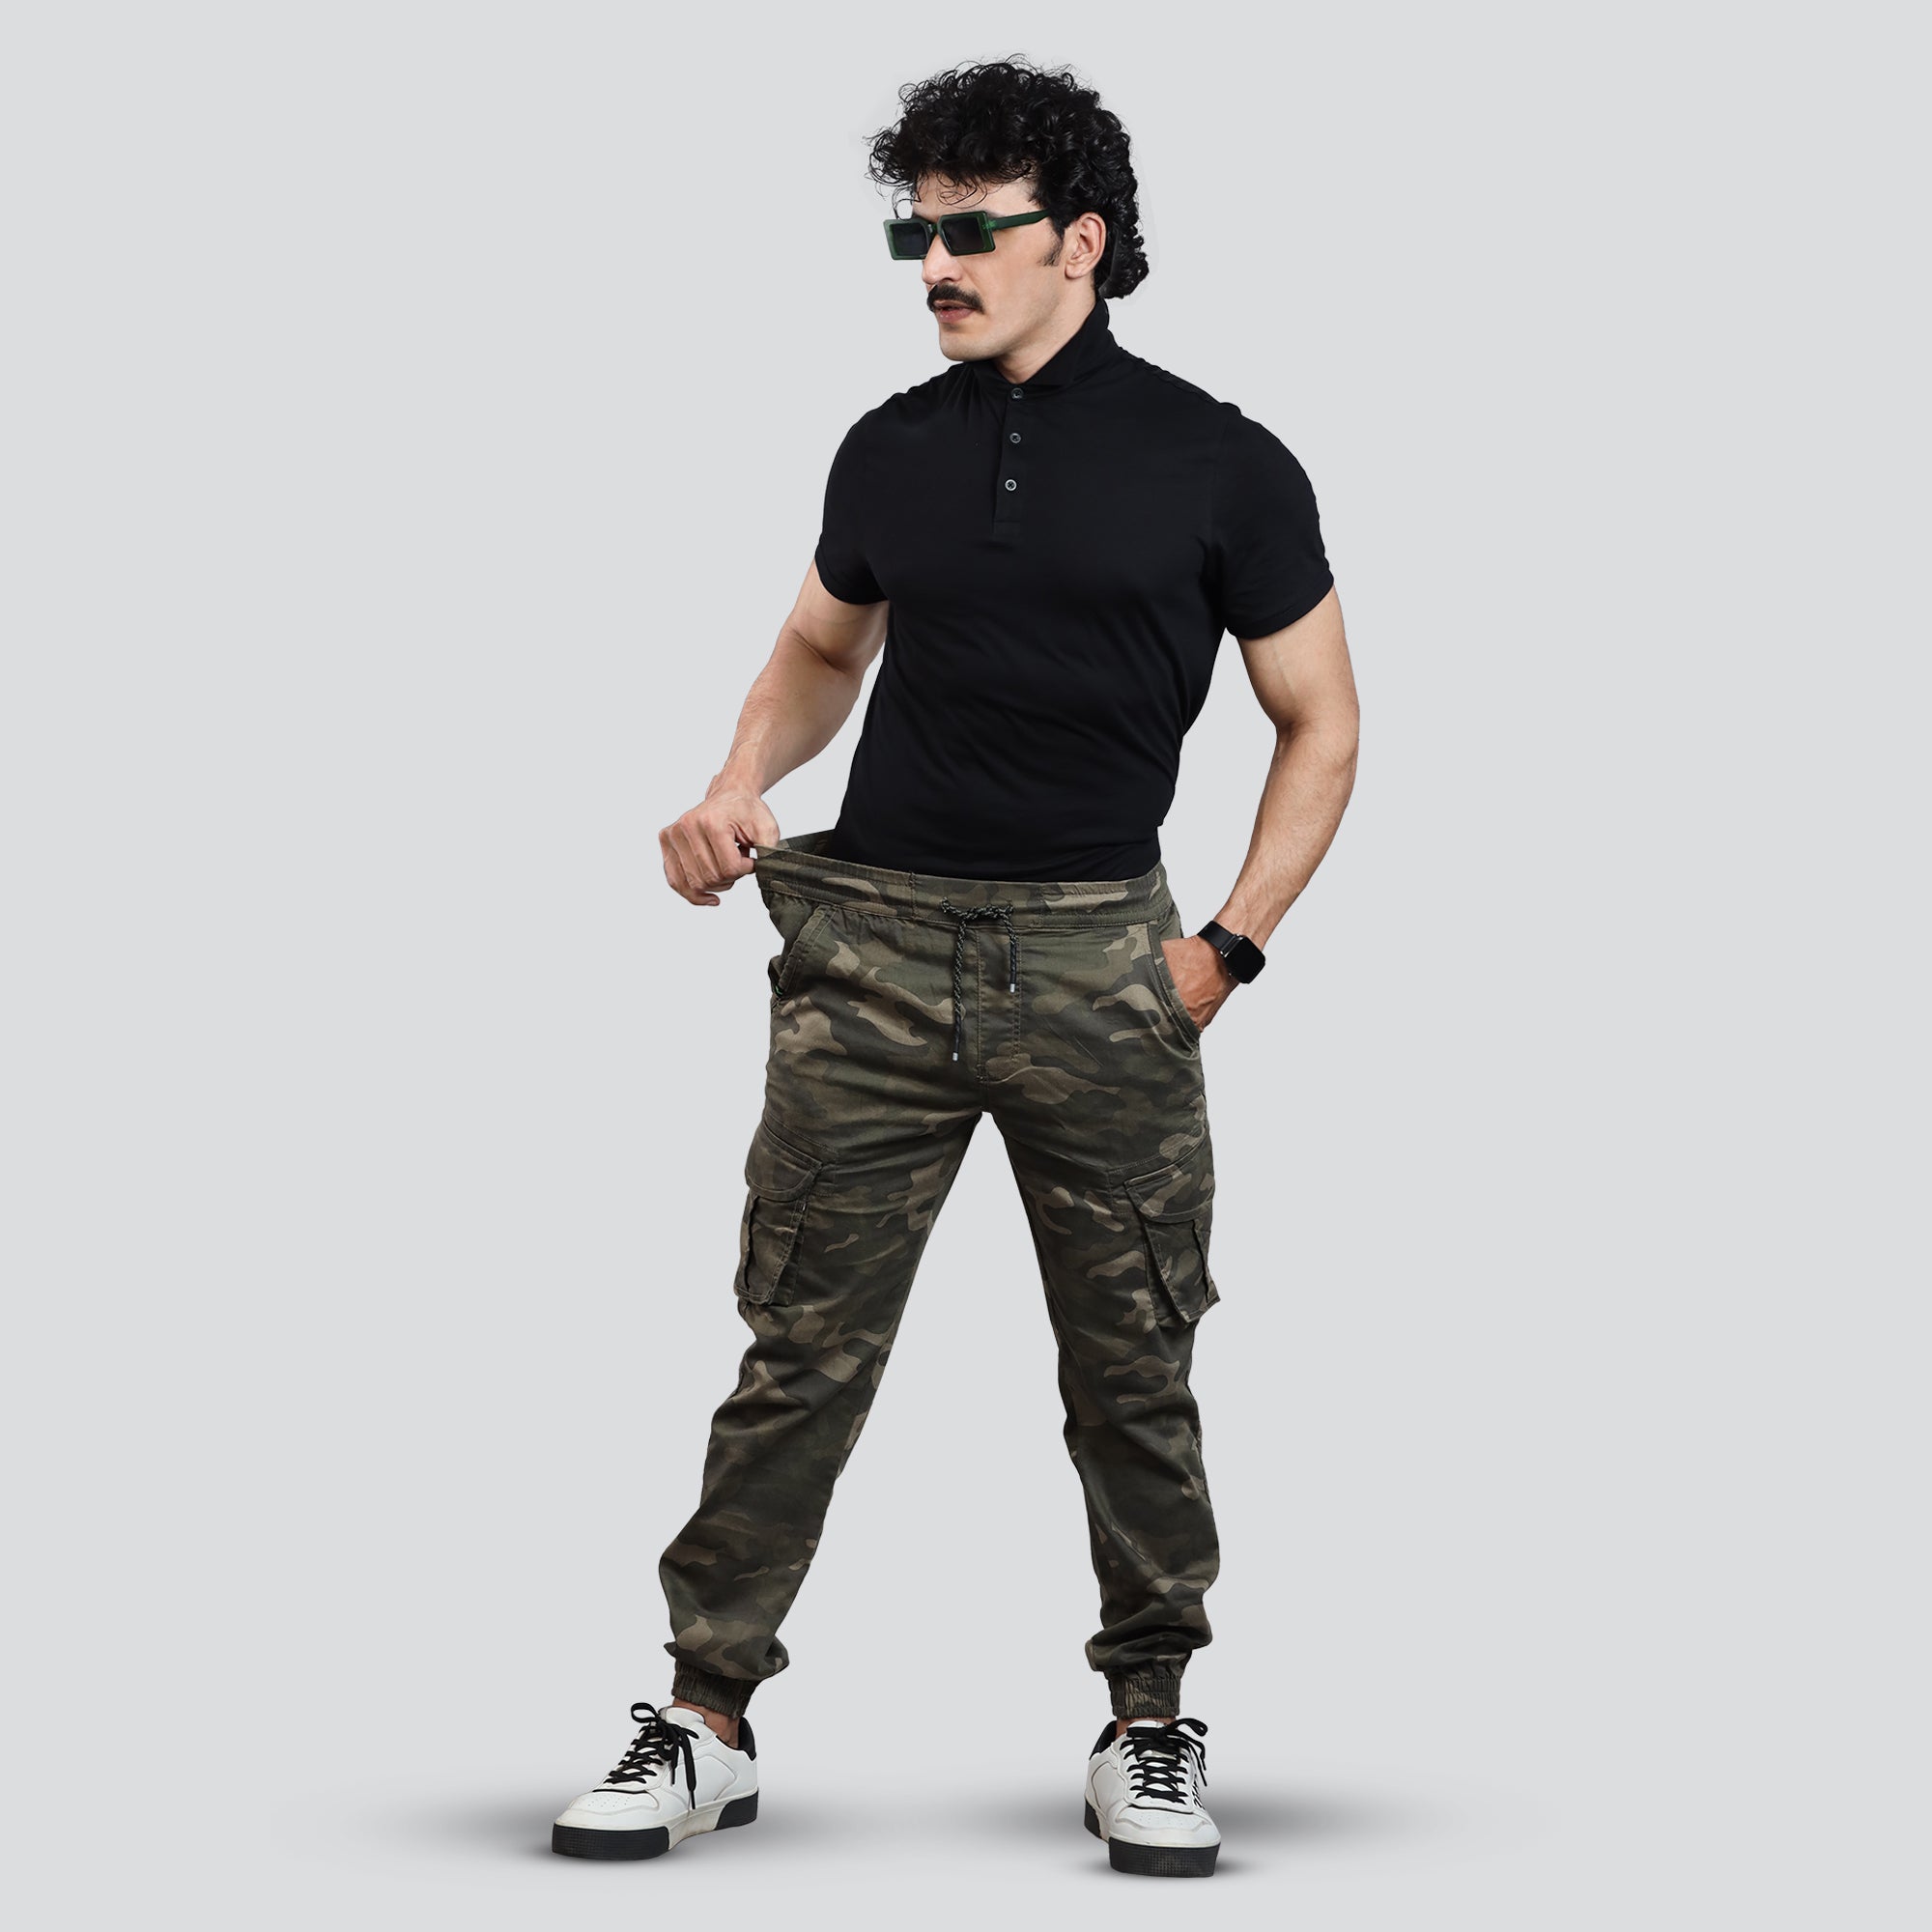 Men's Camouflage Cargo Pants, Stretchable Trousers With 6 Pockets - 30 /  Camouflage